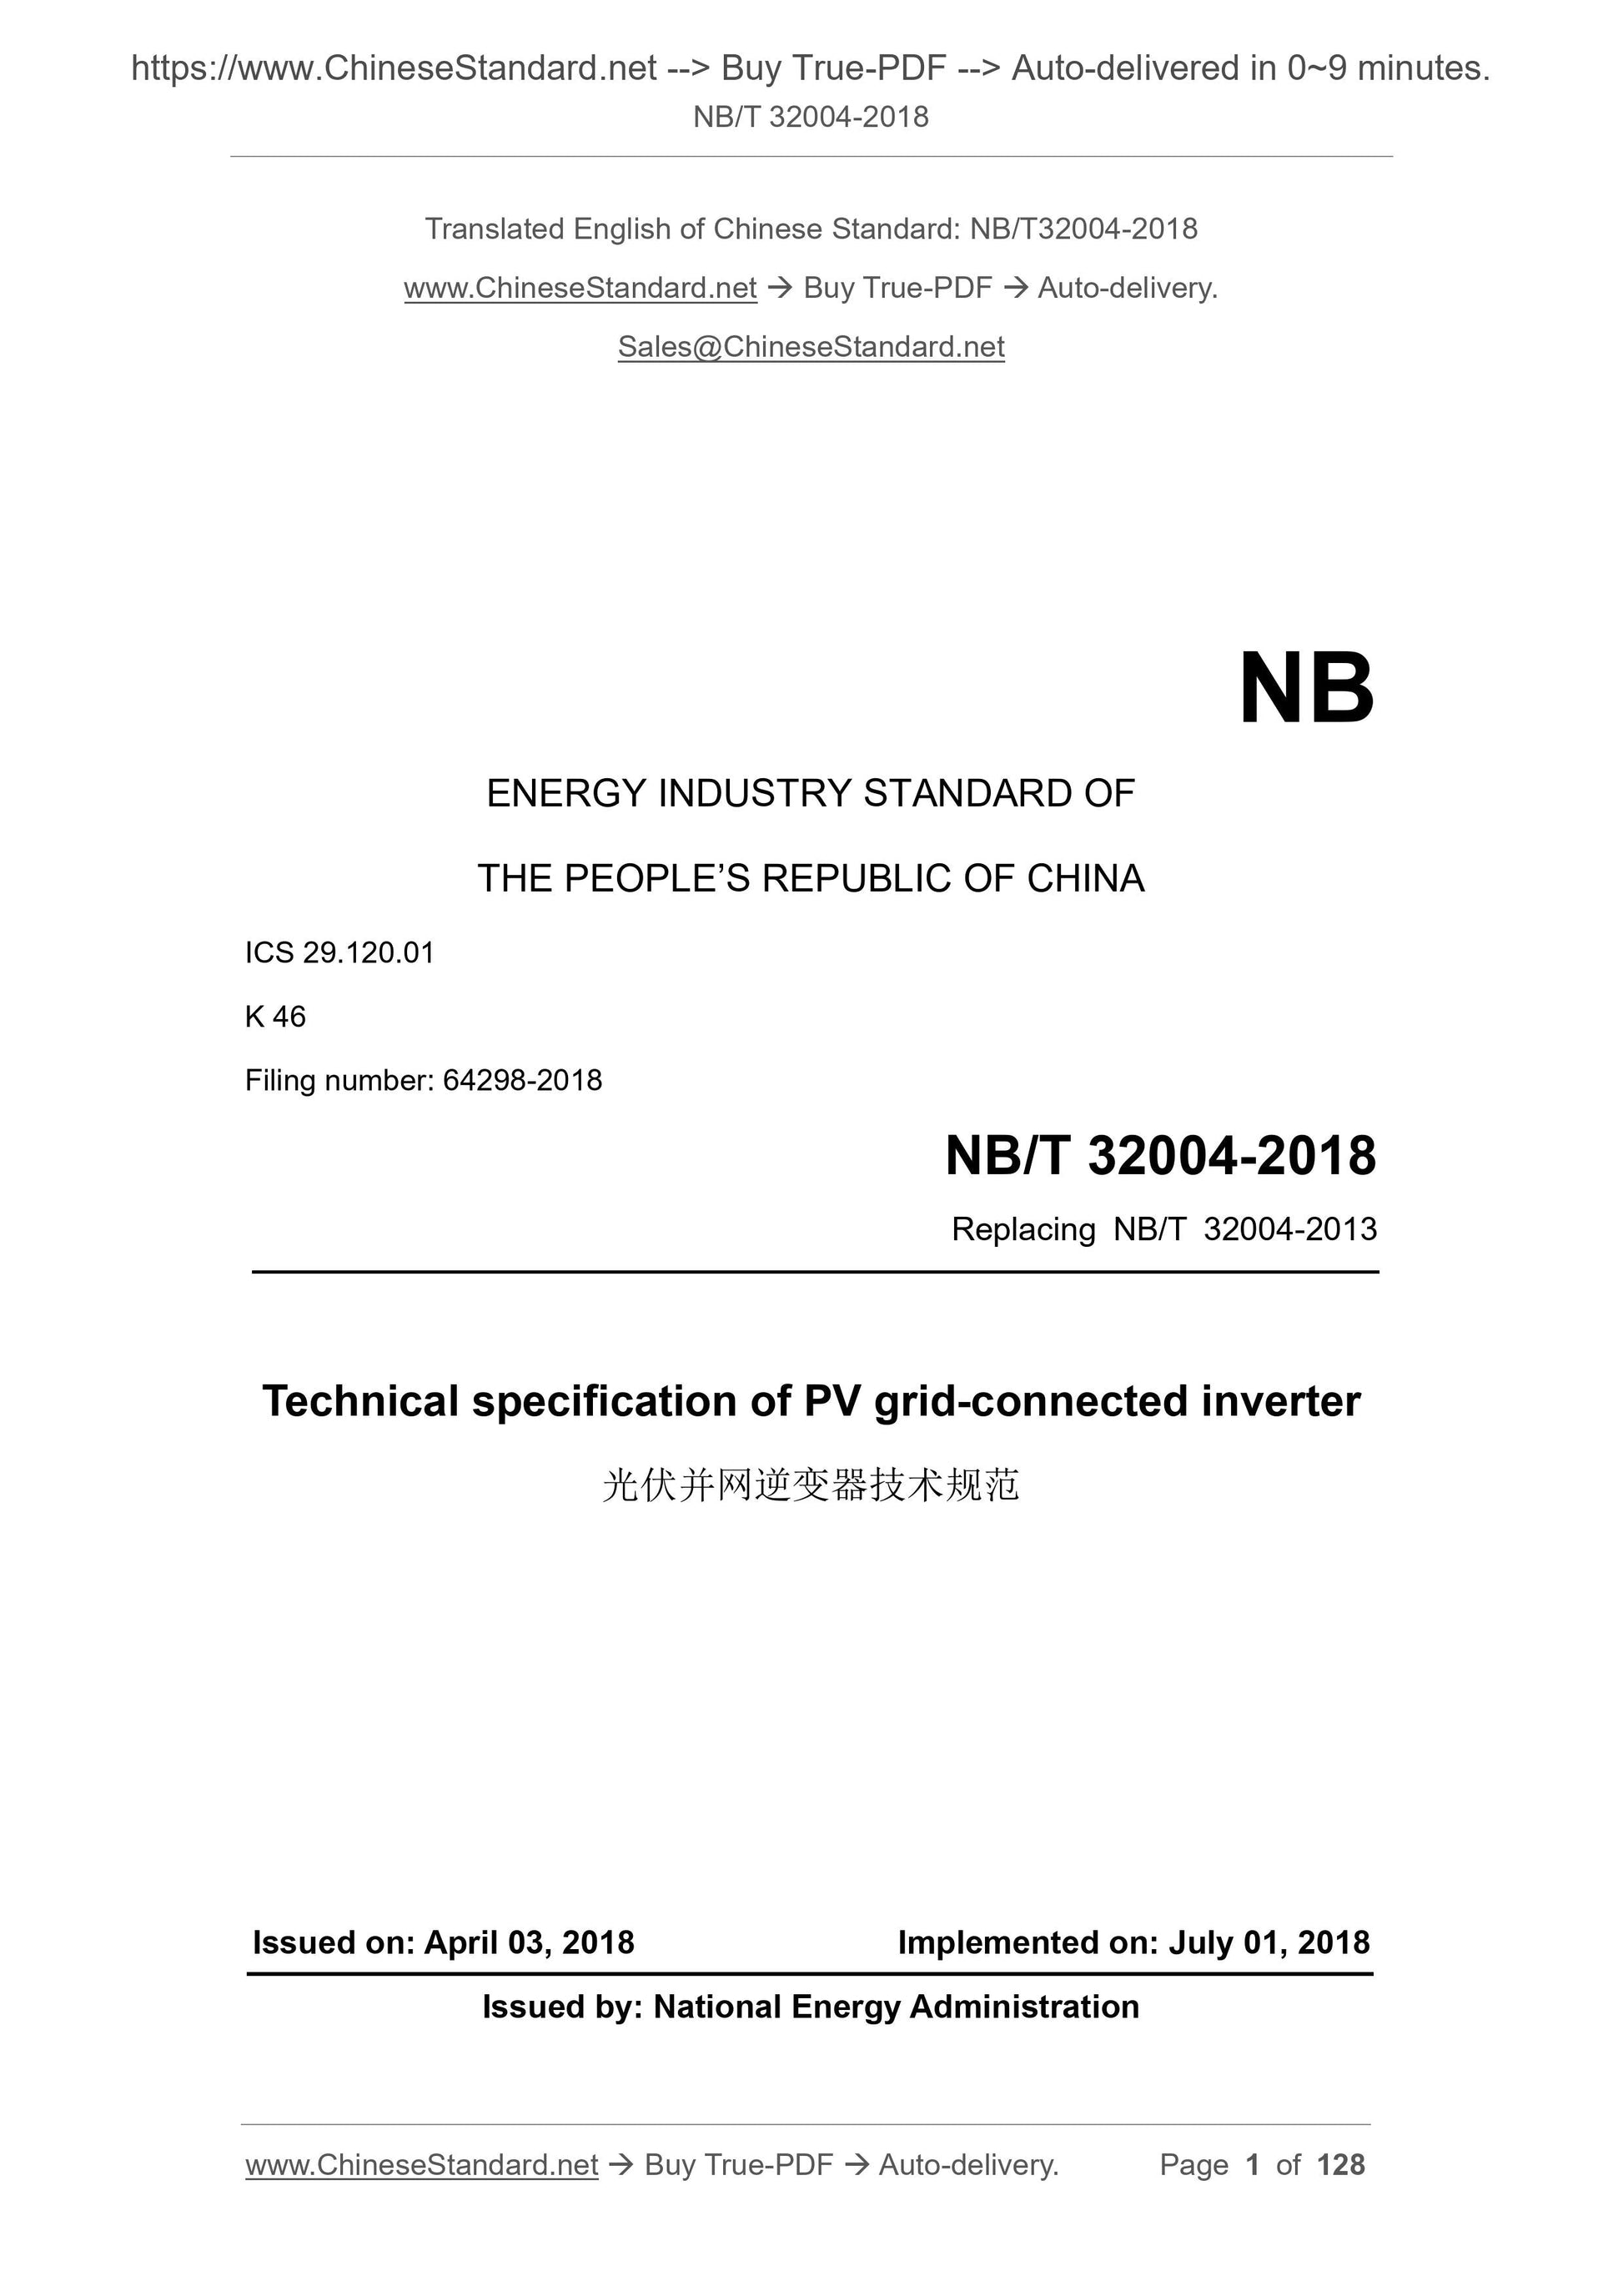 NB/T 32004-2018 Page 1